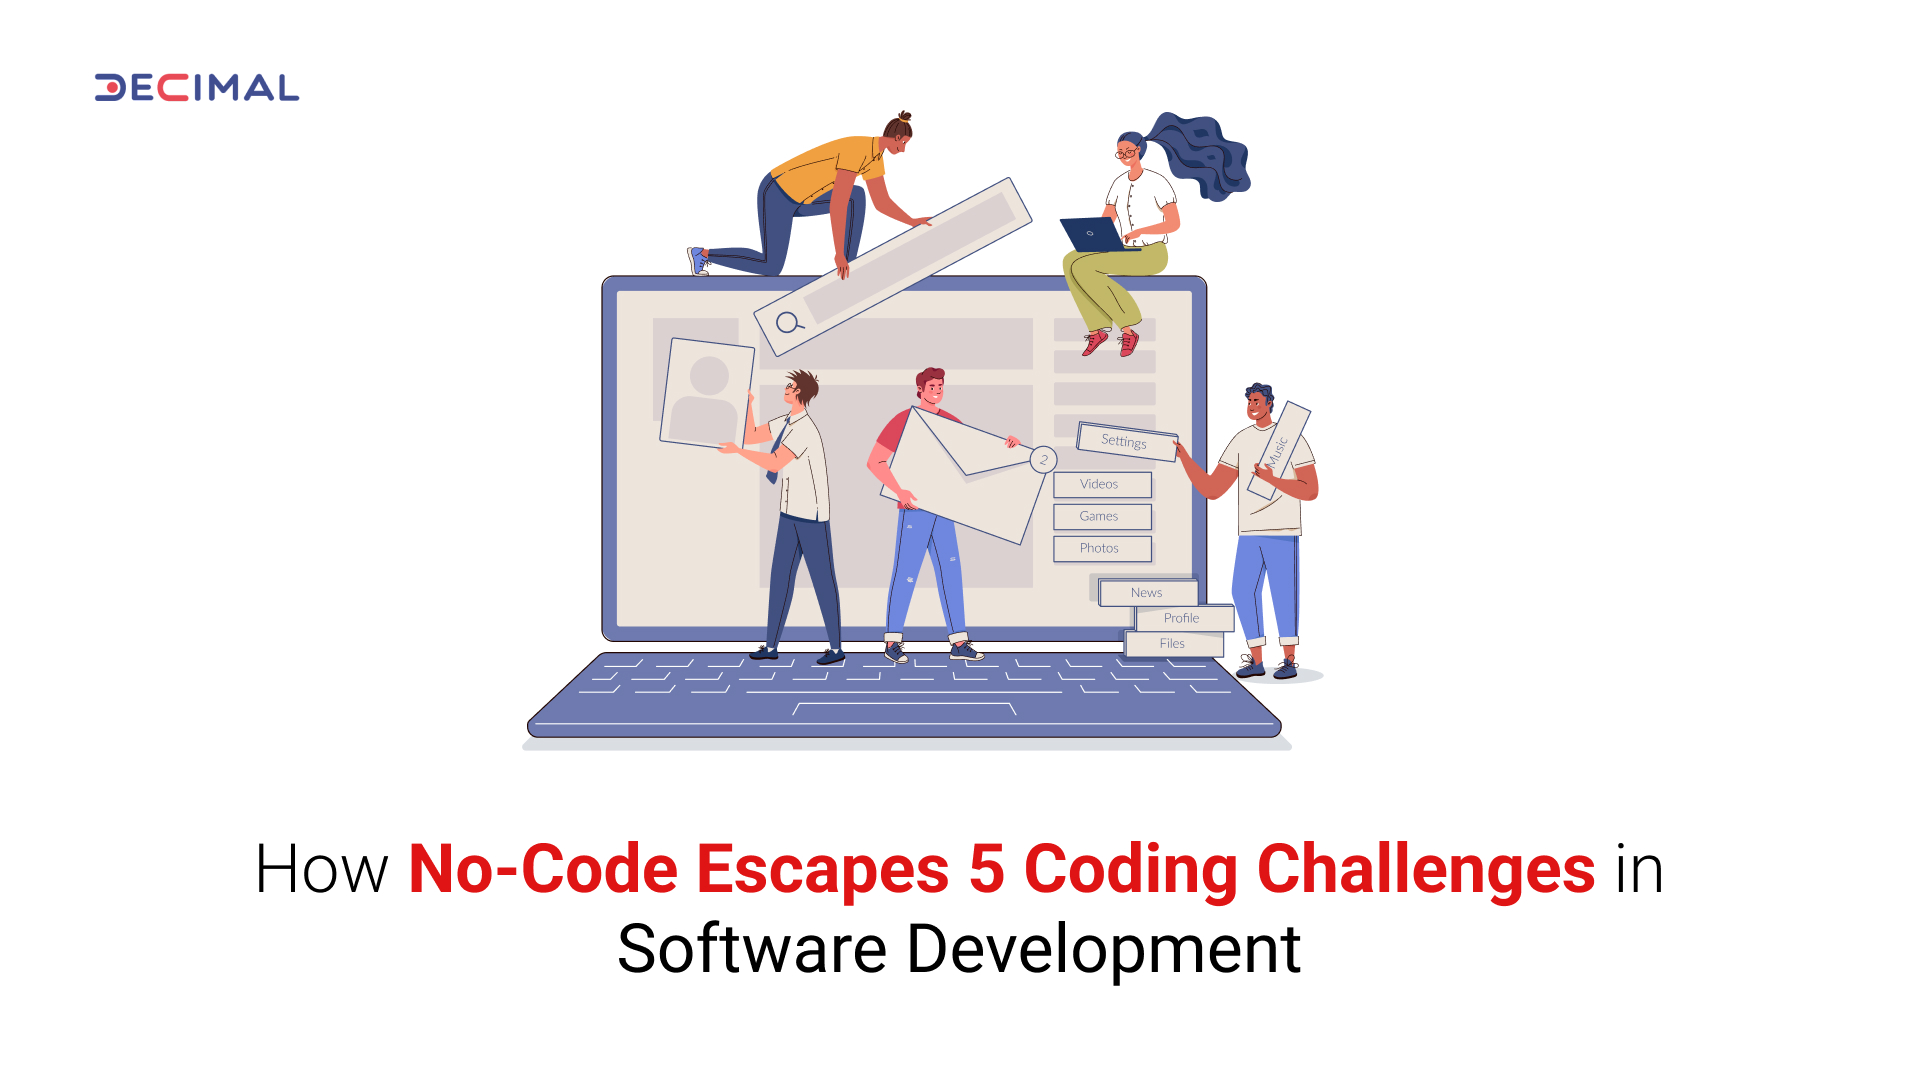 How No-Code Escape 5 coding challenges in software development